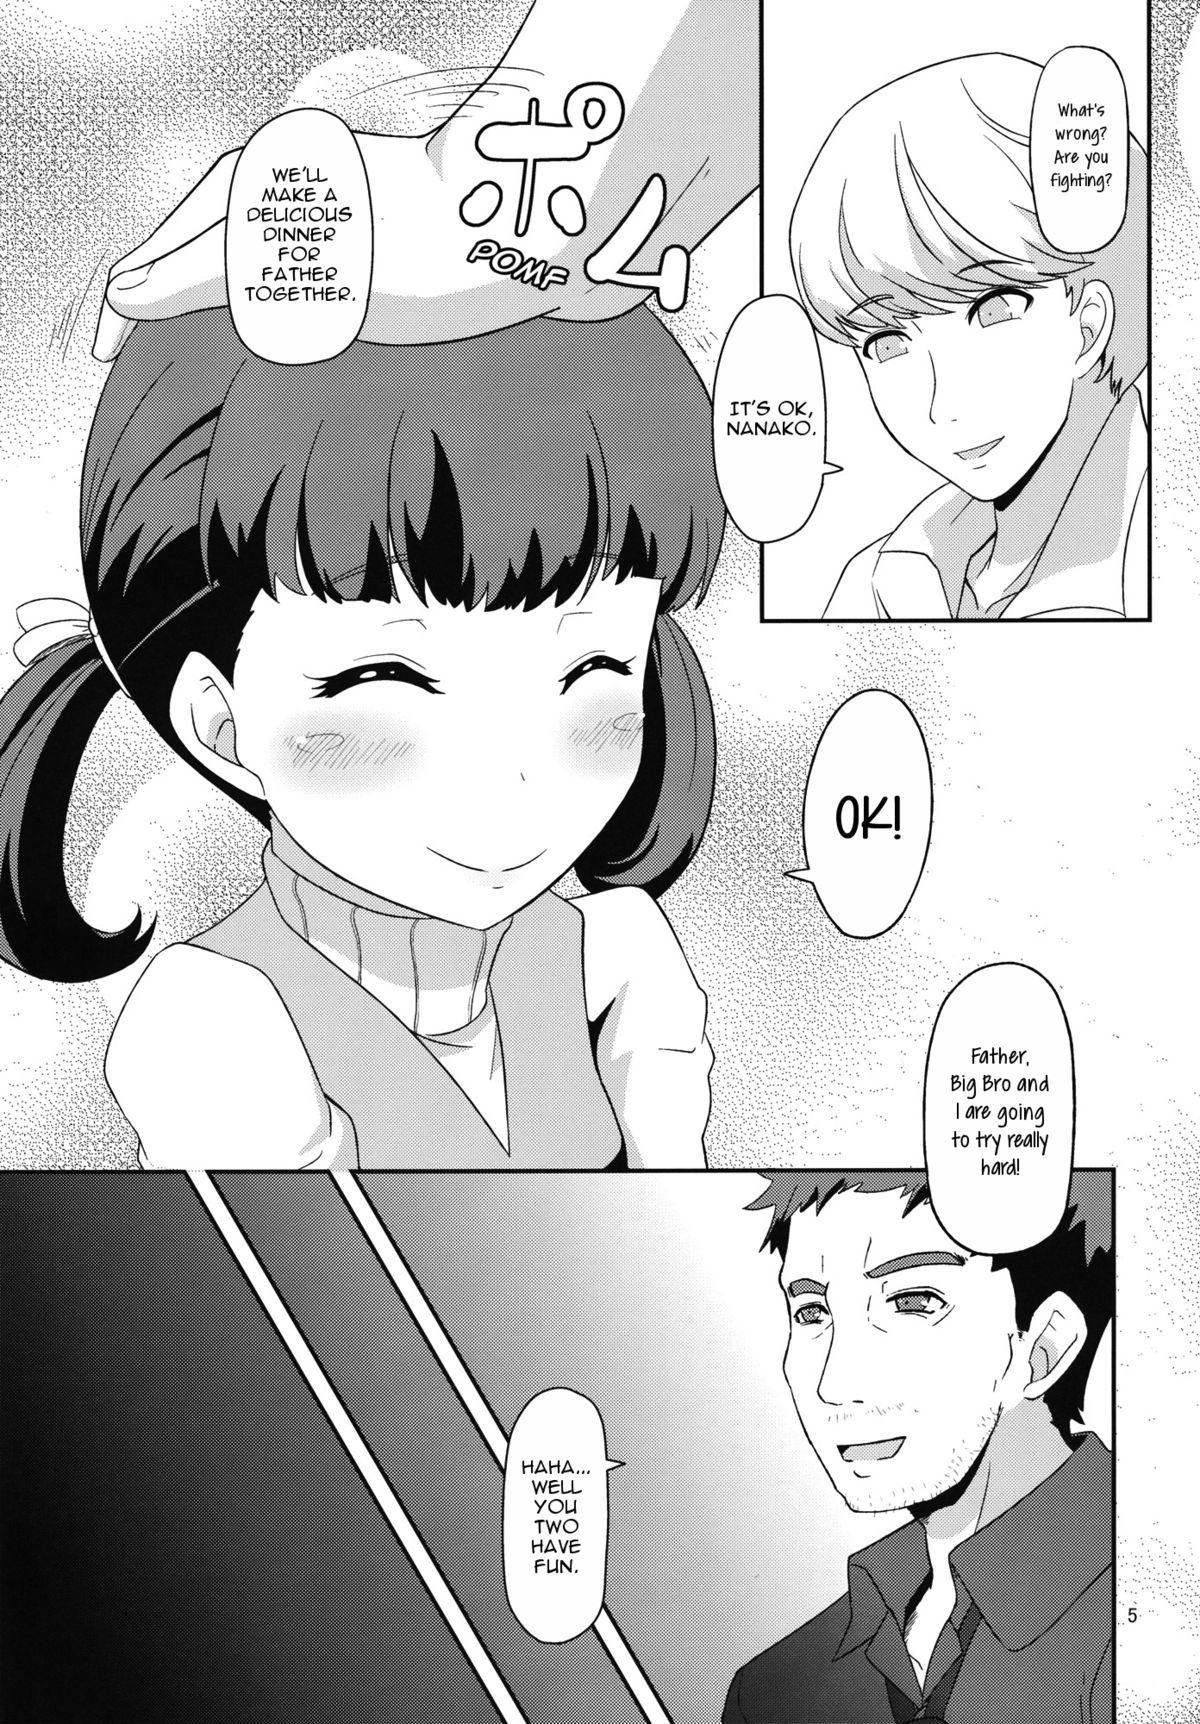 Old Young Oyomesan no Narikata | How to Become a Wife - Persona 4 Tributo - Page 4